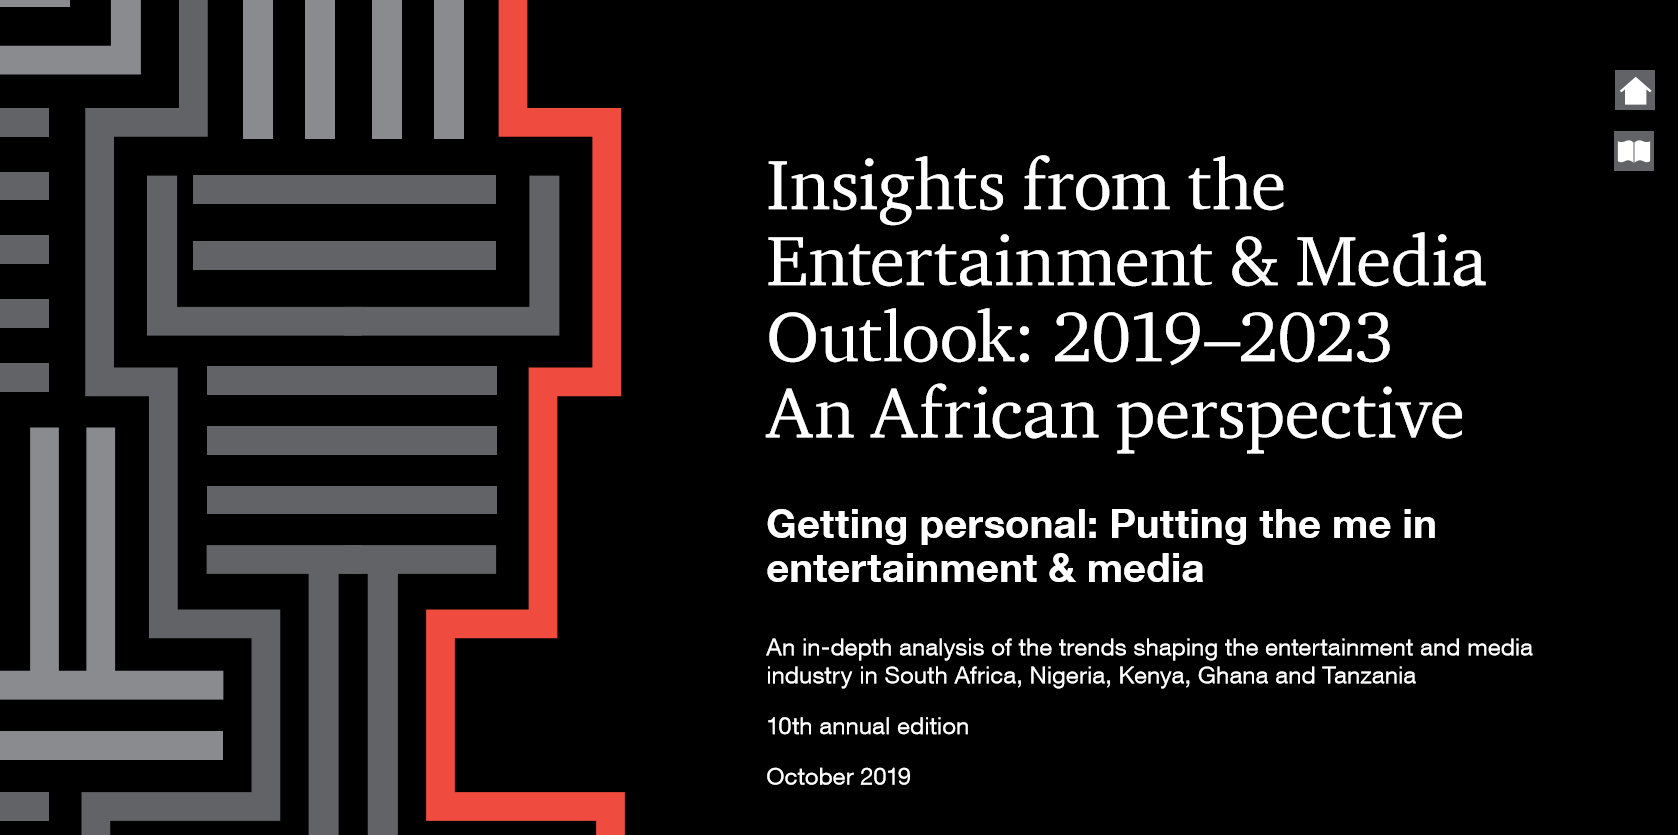 Impressive Forecast for African Media and Entertainment Industry, by PwC